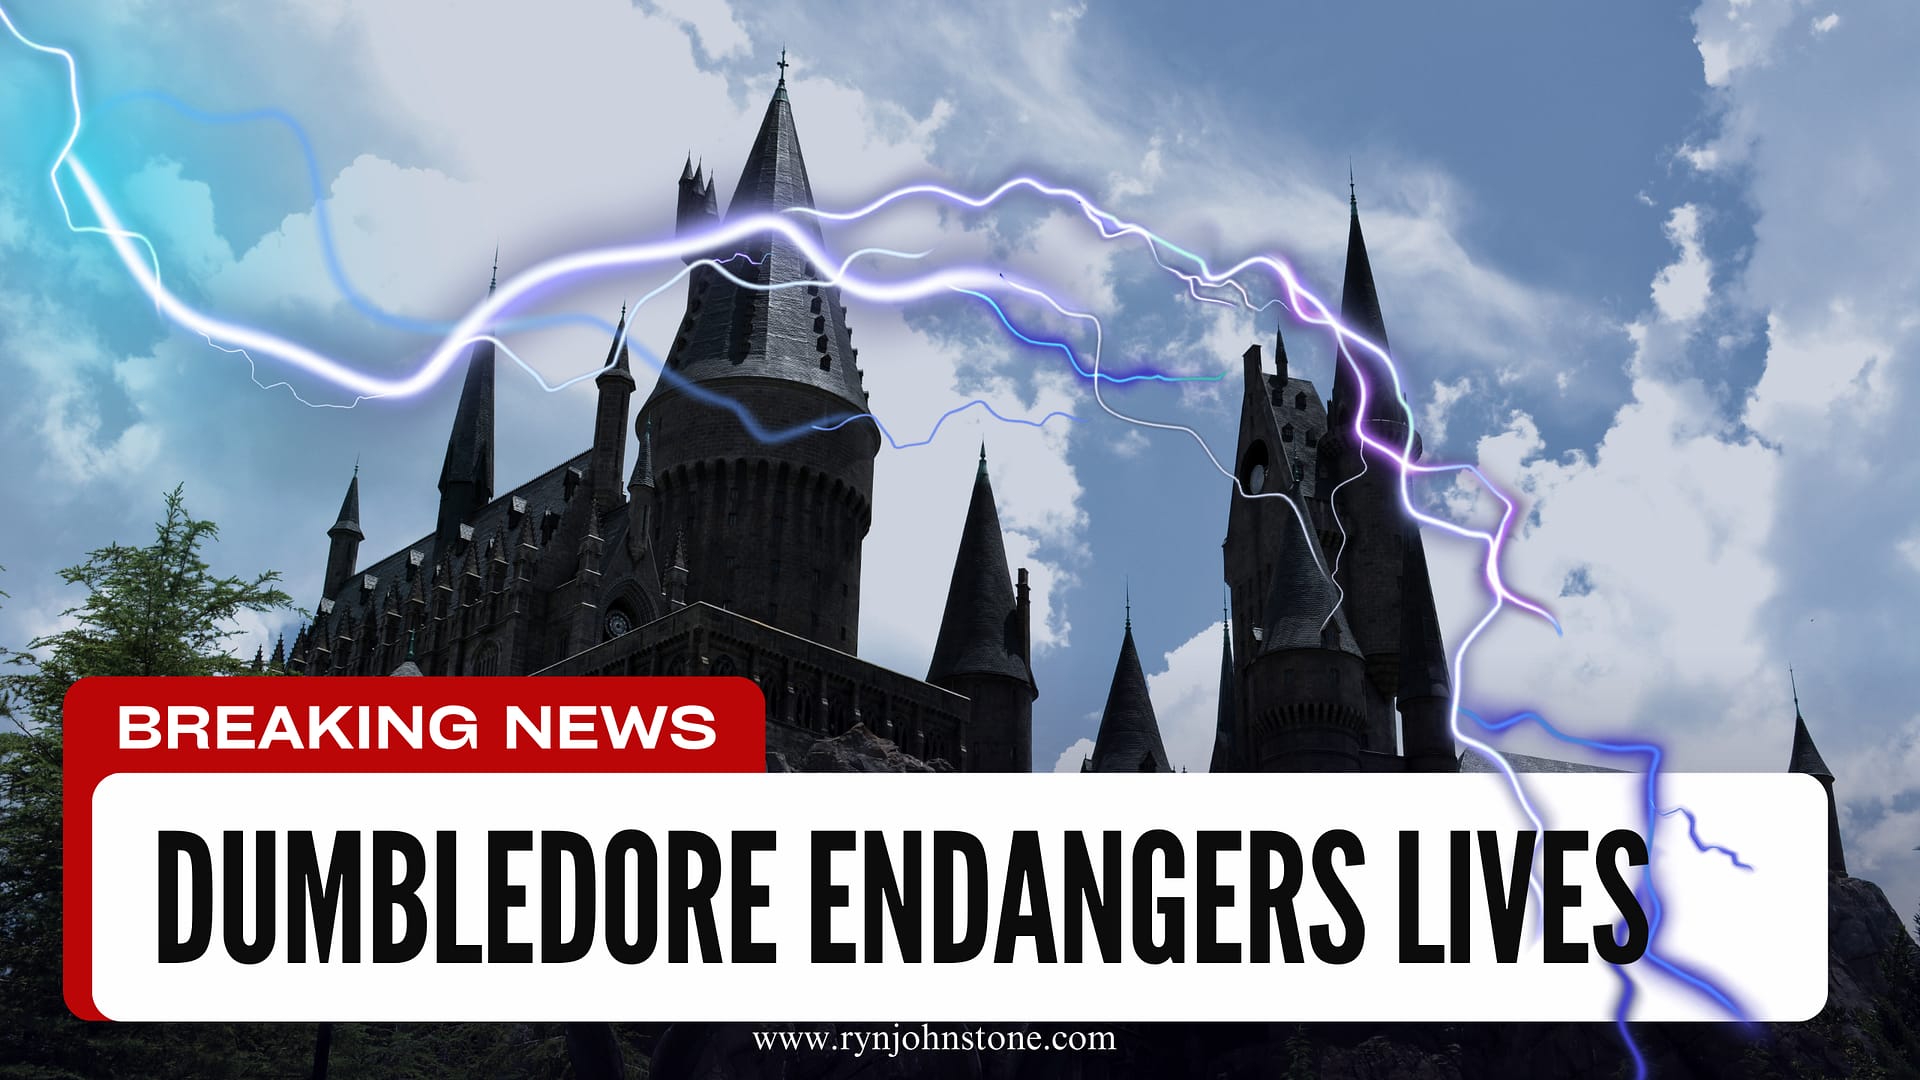 Did Dumbledore Endanger Others